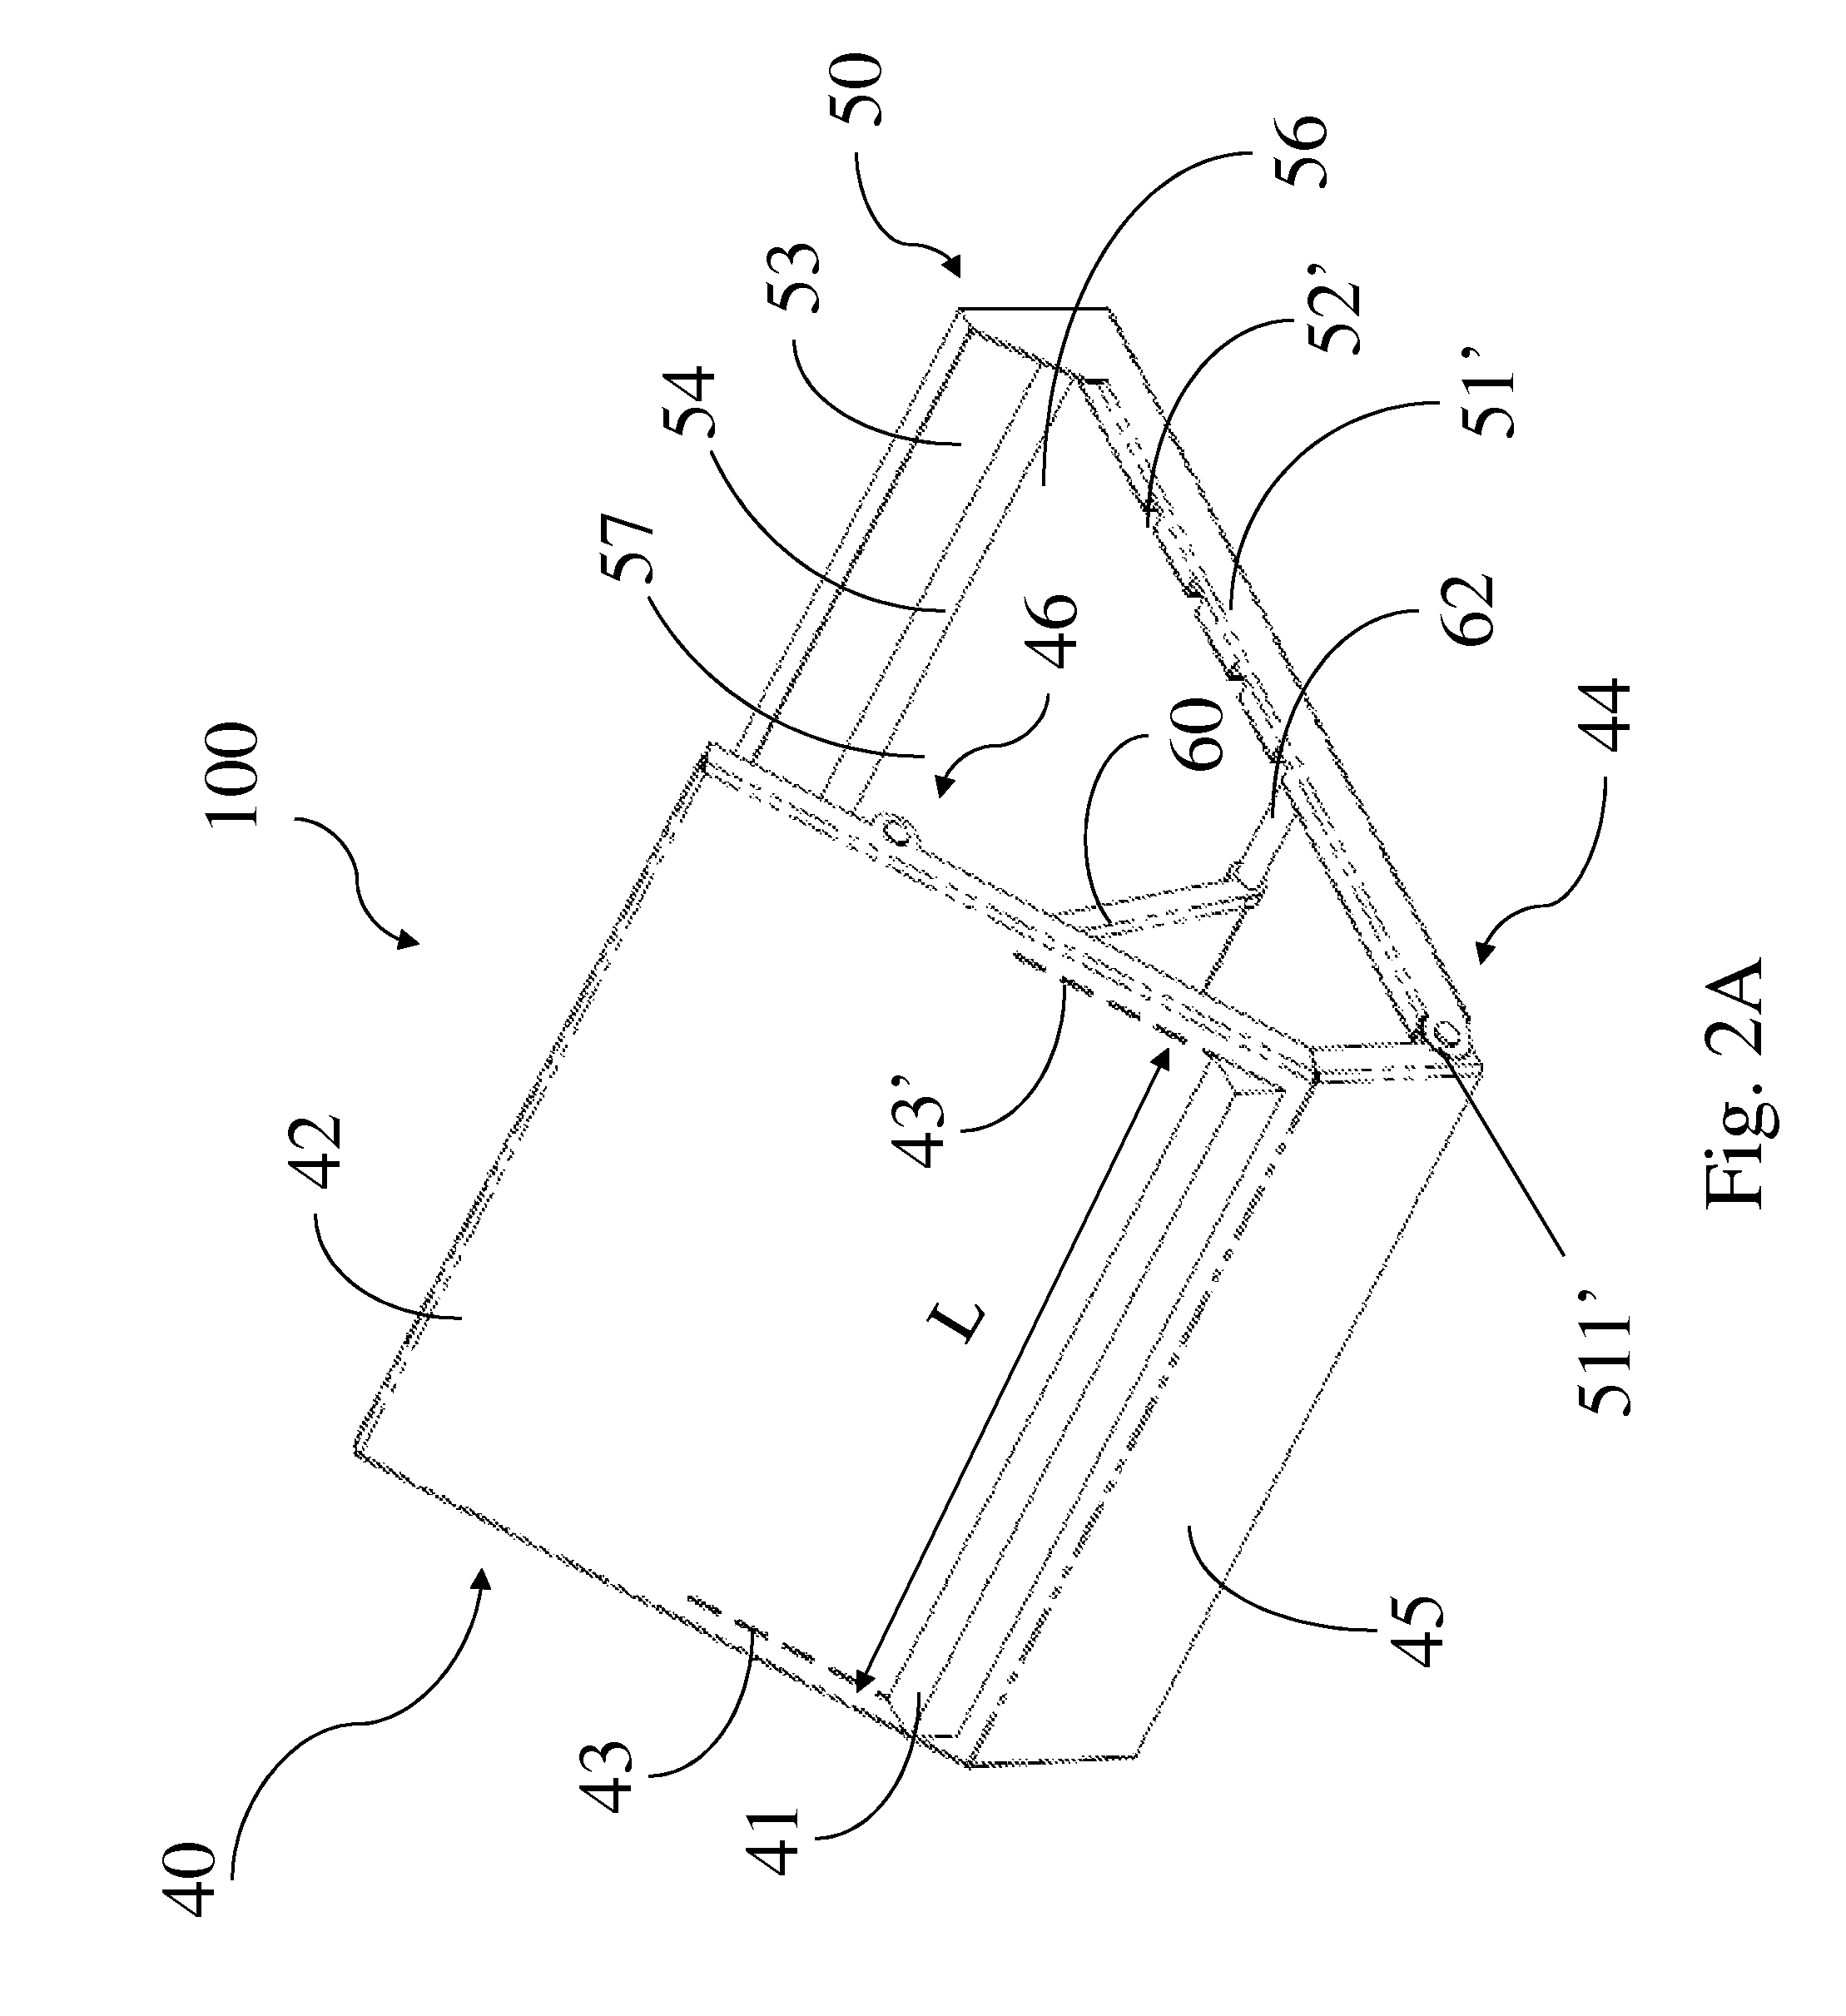 Leg exercise apparatus and method of conducting physical therapy using same